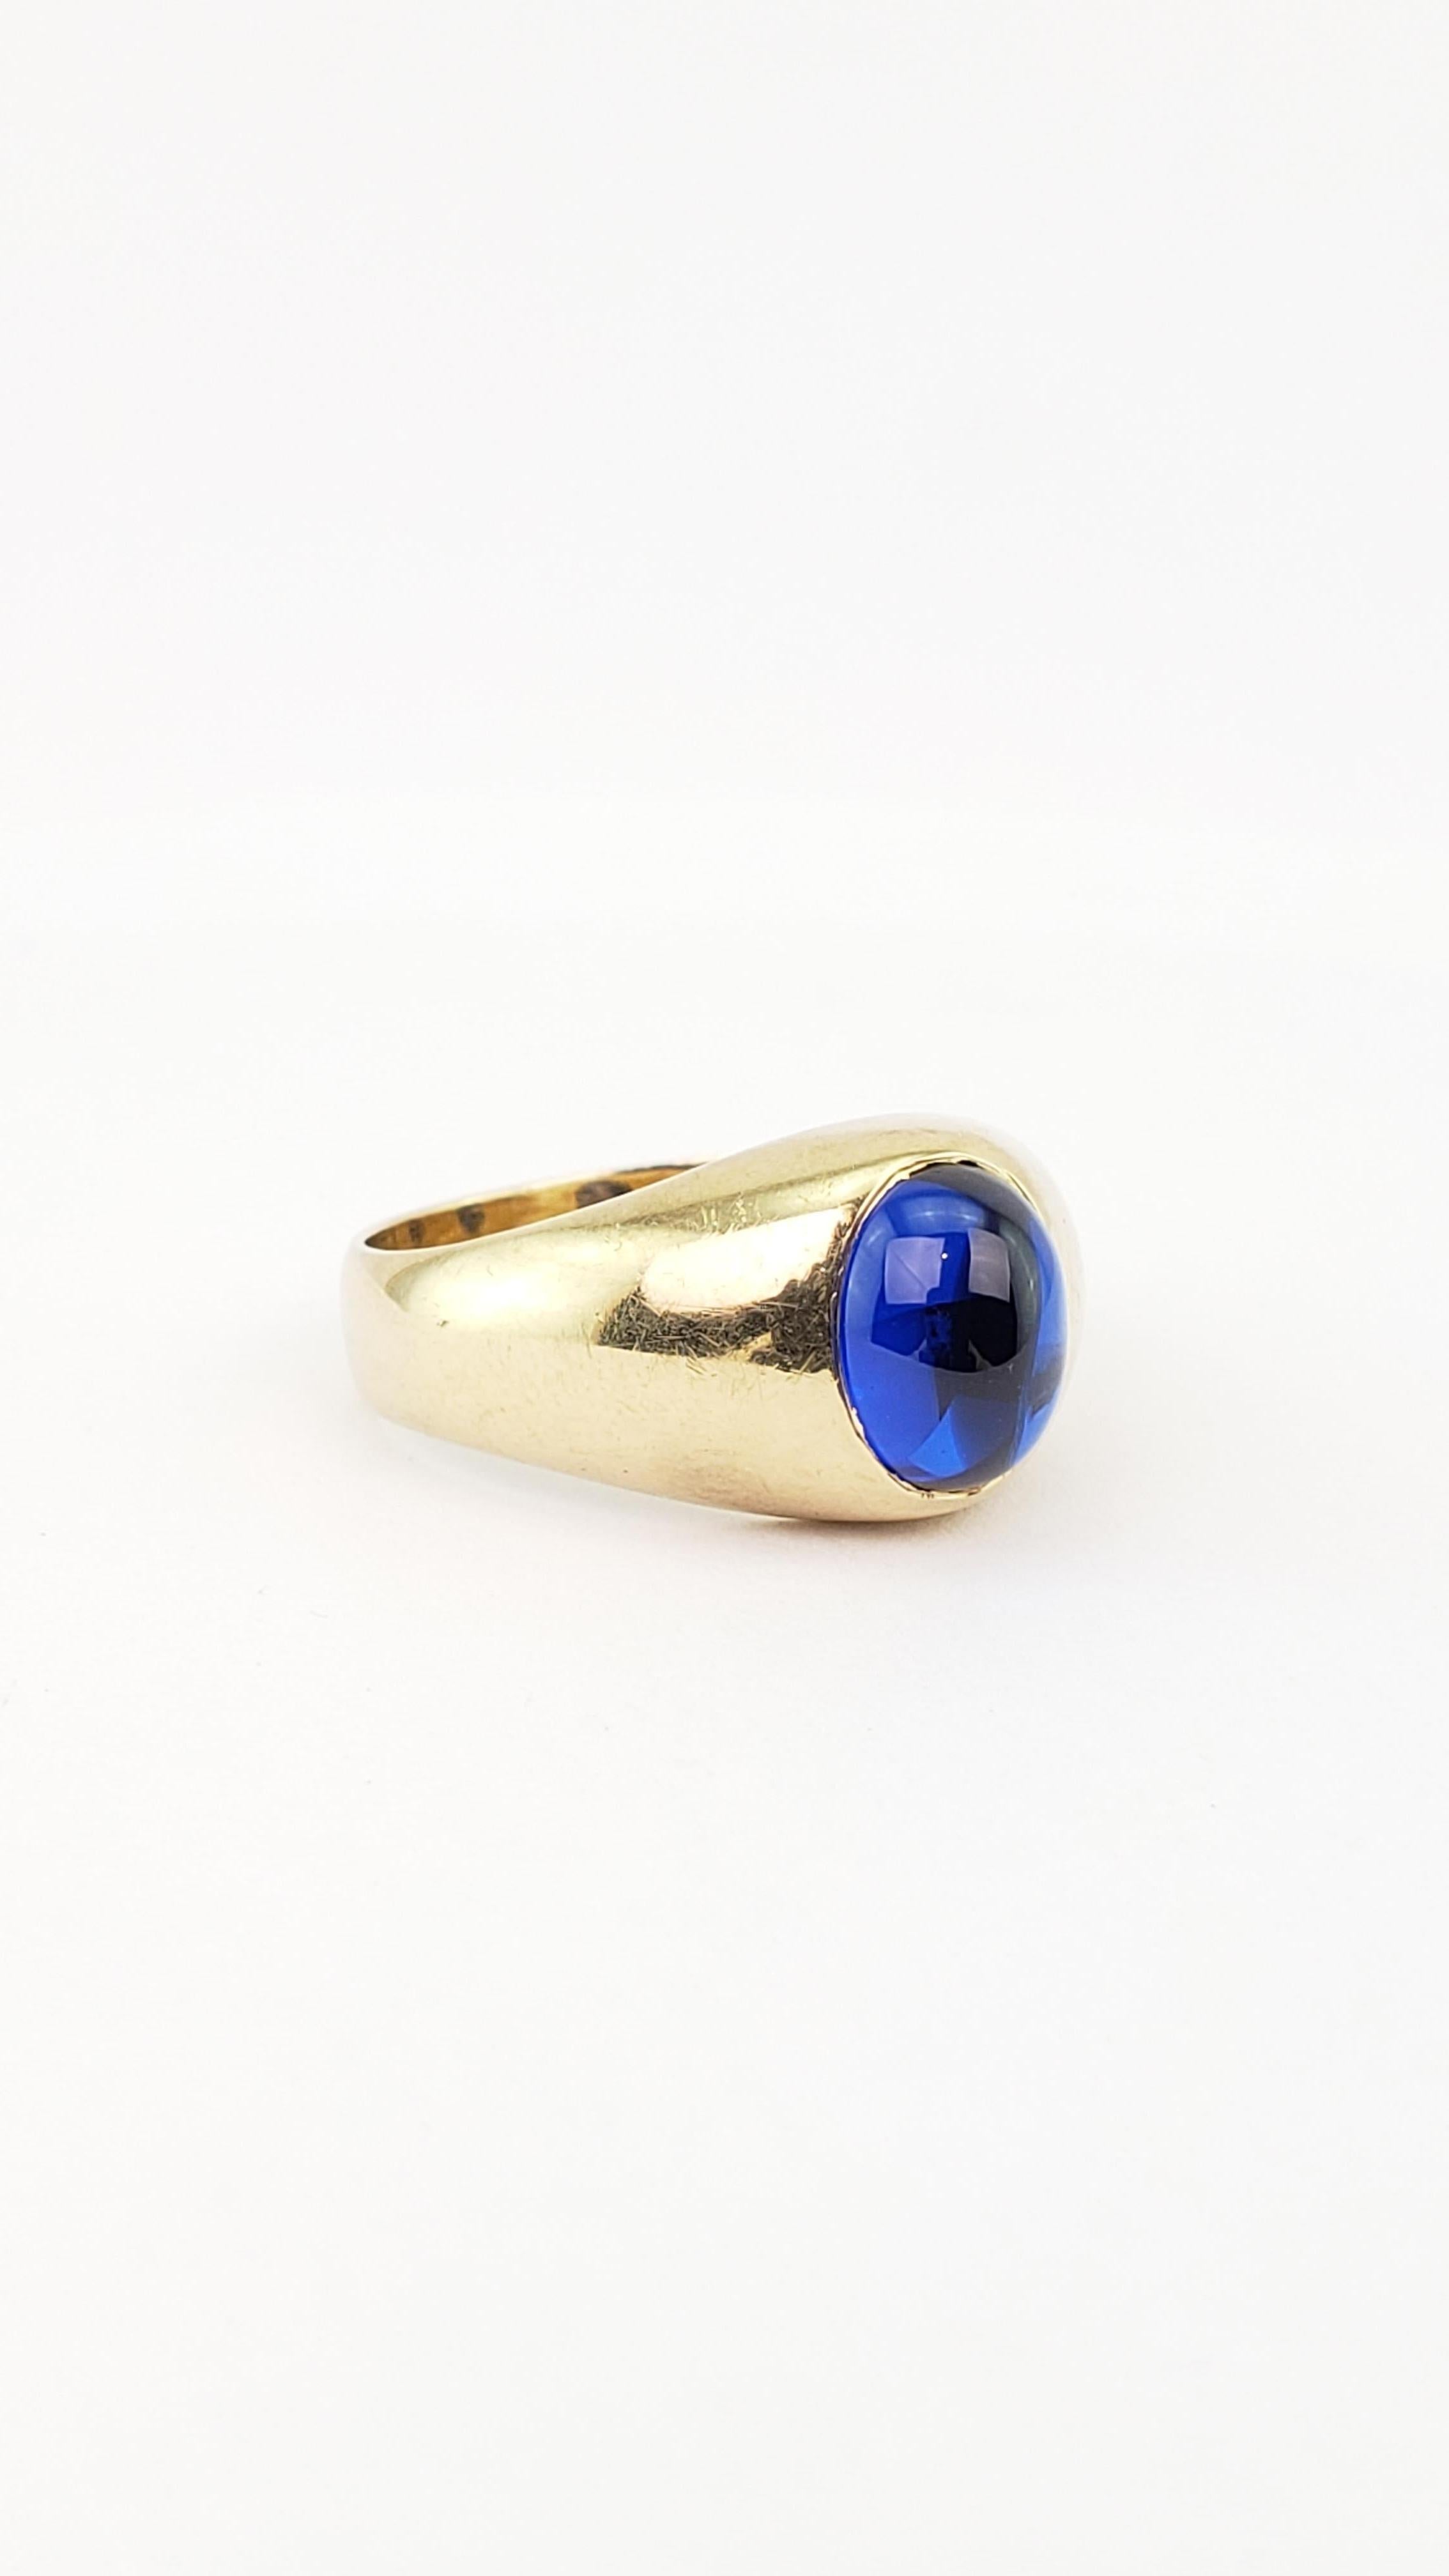 10k gold vintage unisex ring with 3.89 carat synthetic blue sapphire oval cabochon.

Size: 10 (please inquire if you need size adjusted)
    